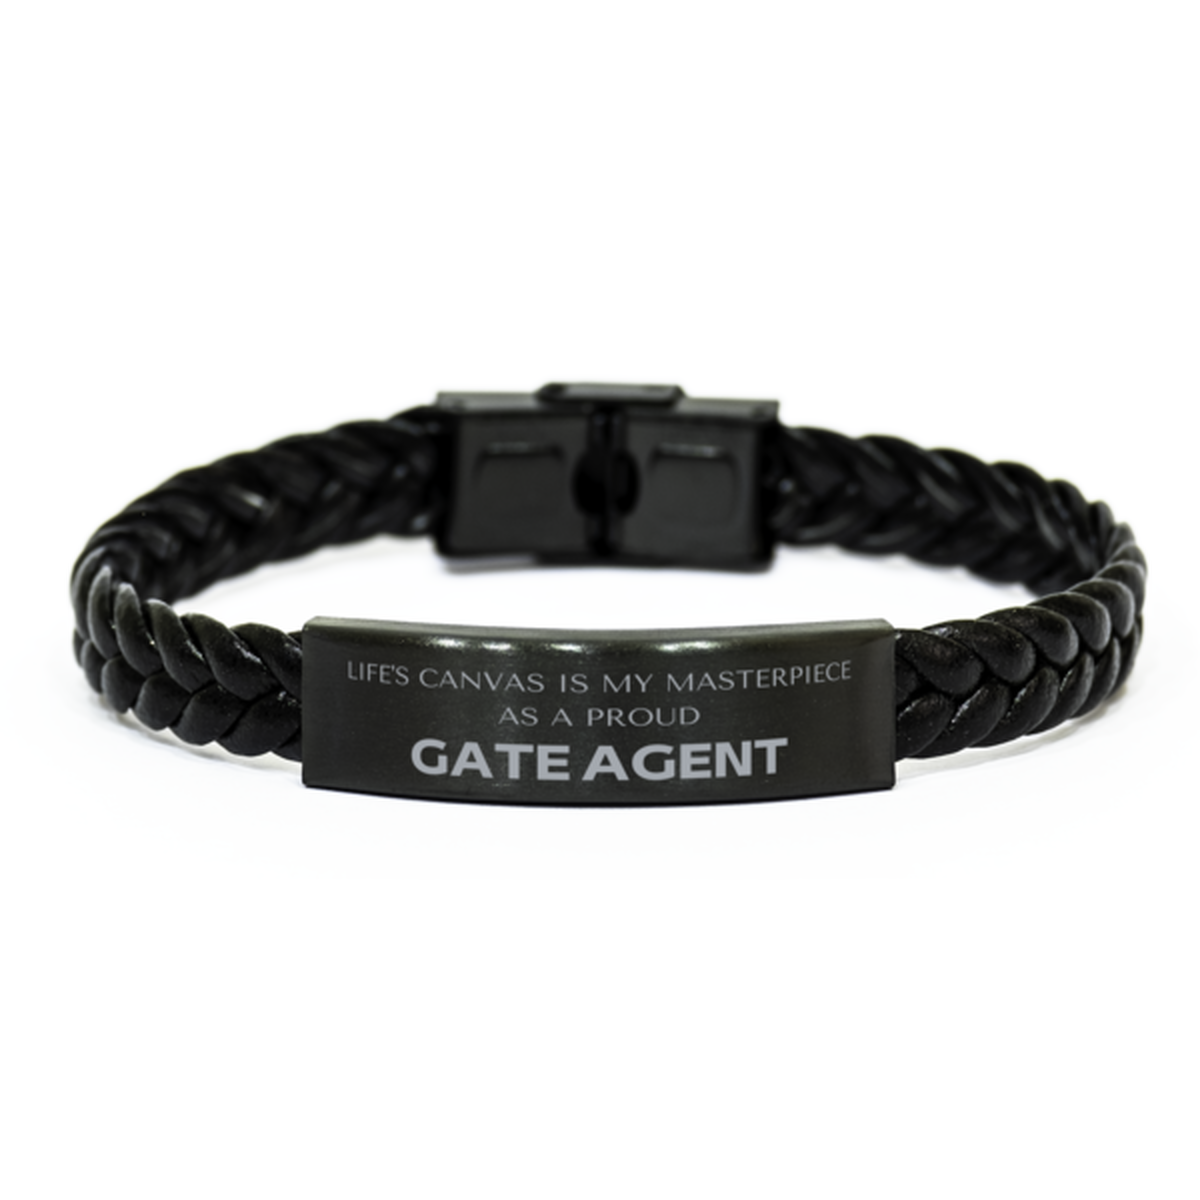 Proud Gate Agent Gifts, Life's canvas is my masterpiece, Epic Birthday Christmas Unique Braided Leather Bracelet For Gate Agent, Coworkers, Men, Women, Friends